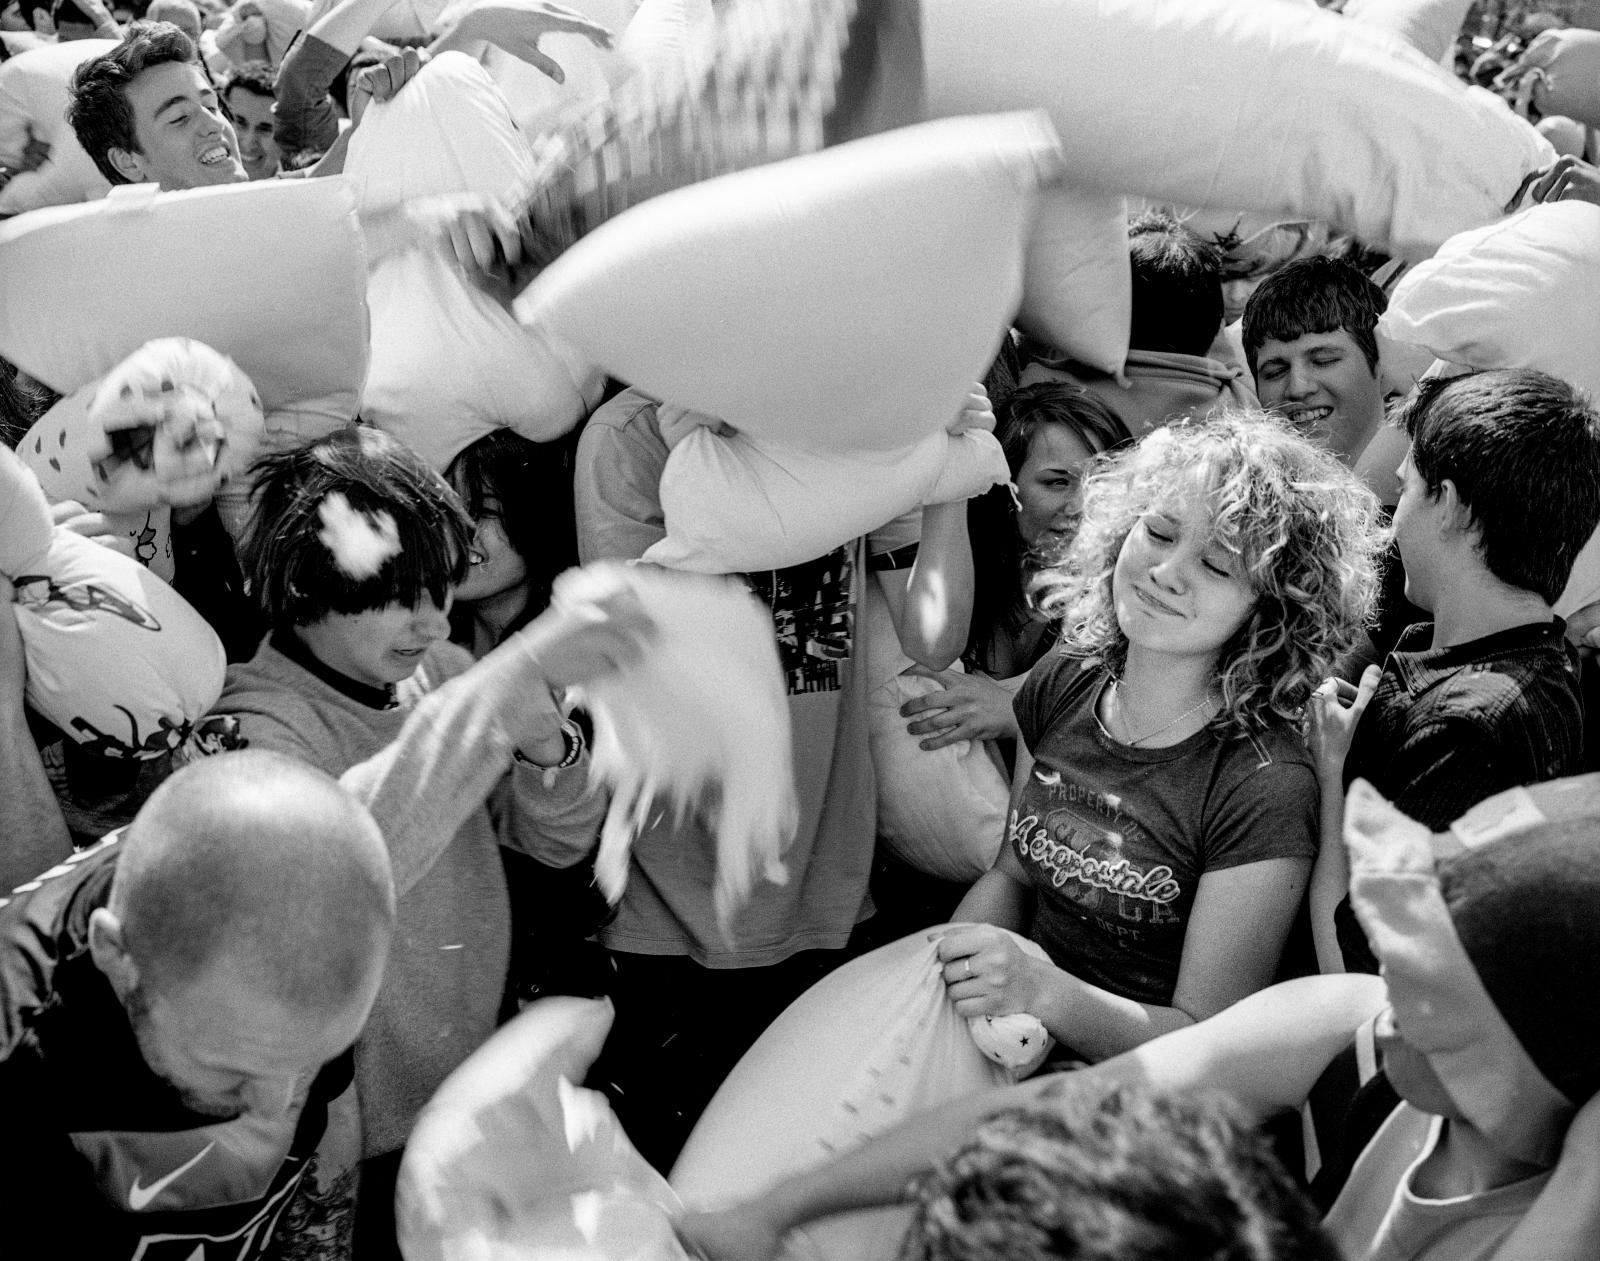 Image from Street Photography/BW Works -  International Pillow Fight, April 3, 2001  Union Square...